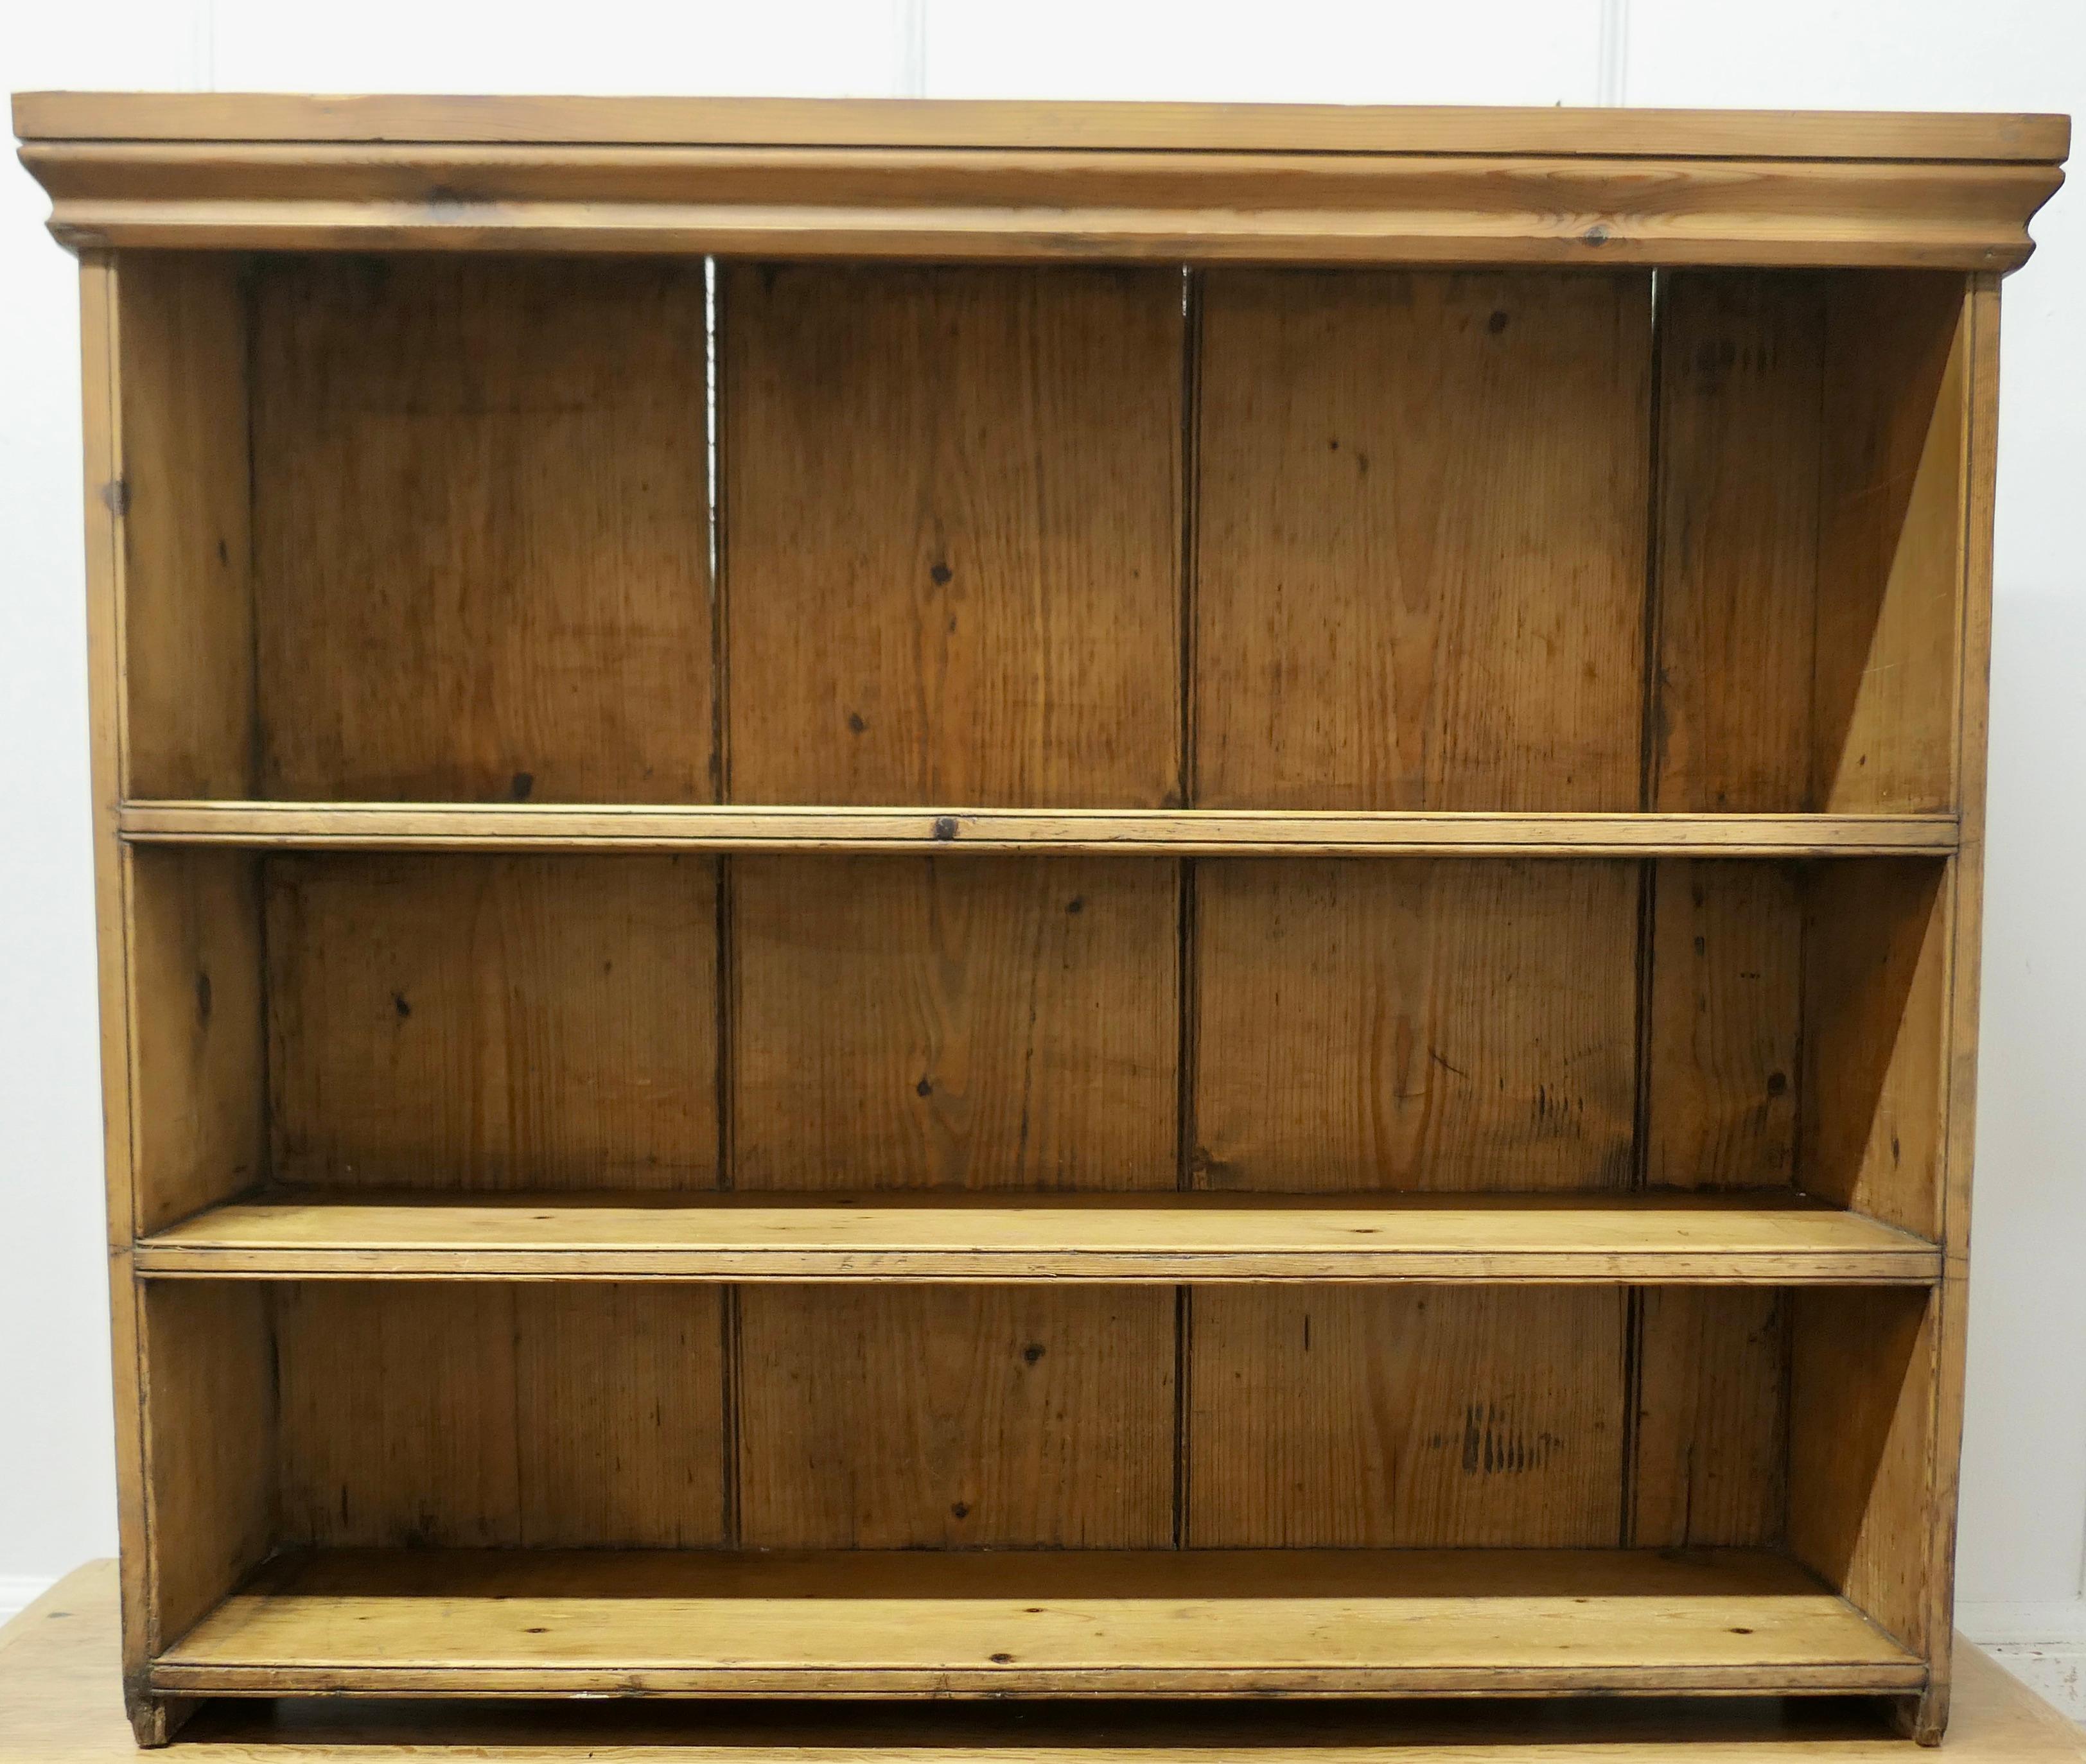 Victorian Pine Open Book Case, Wall Shelves

This is an excellent quality piece,  
The book case is made in Pine, it has 3 shelves these are moulded along the front and it can be wall hung or set on a cupboard
The Book shelf is in good condition and